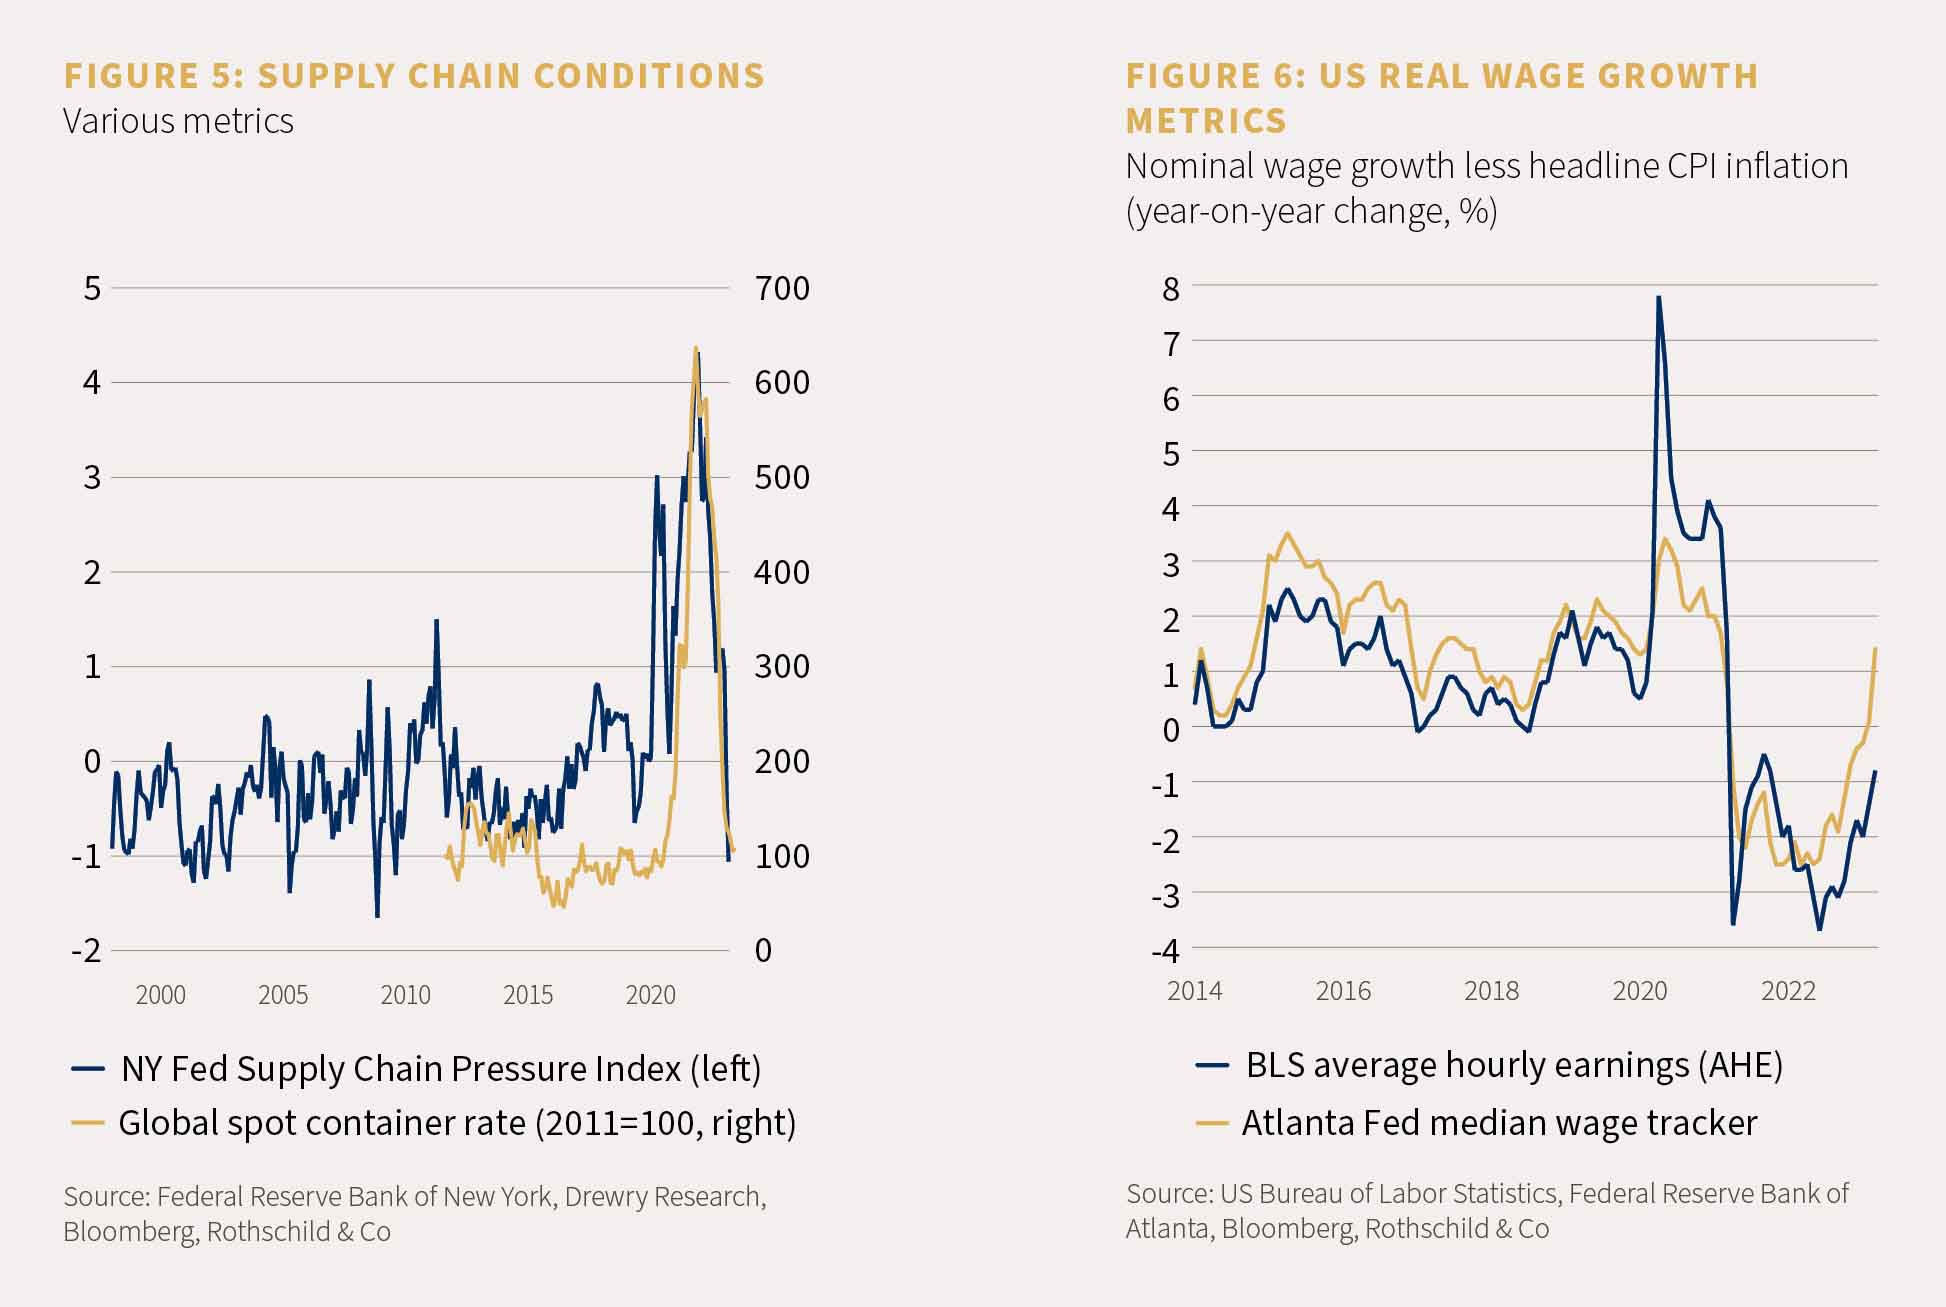 Chart showing supply chain conditions and chart showing US real wage growth metrics